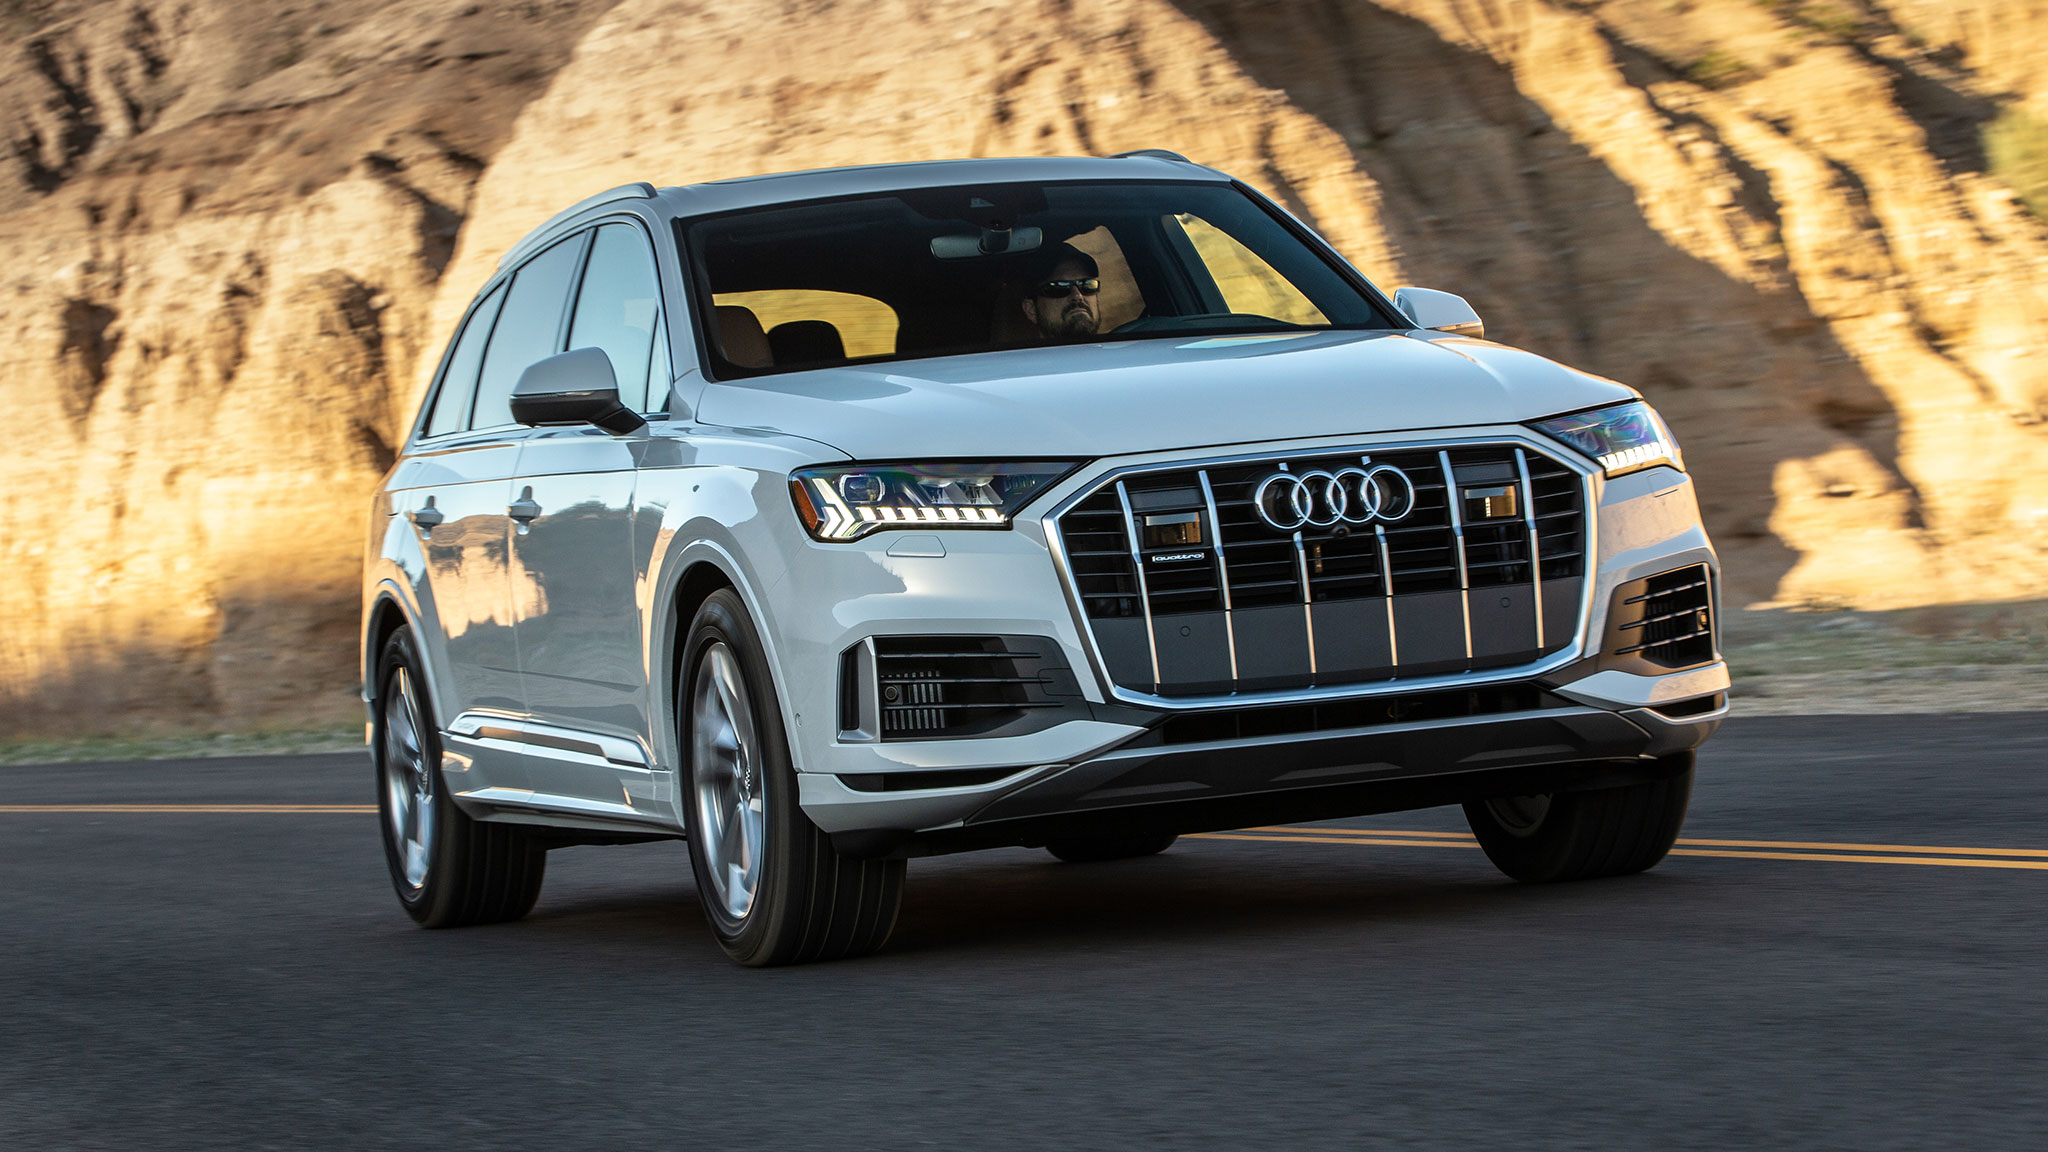 How Much Is It To Hire A Audi Q7 In Dubai 